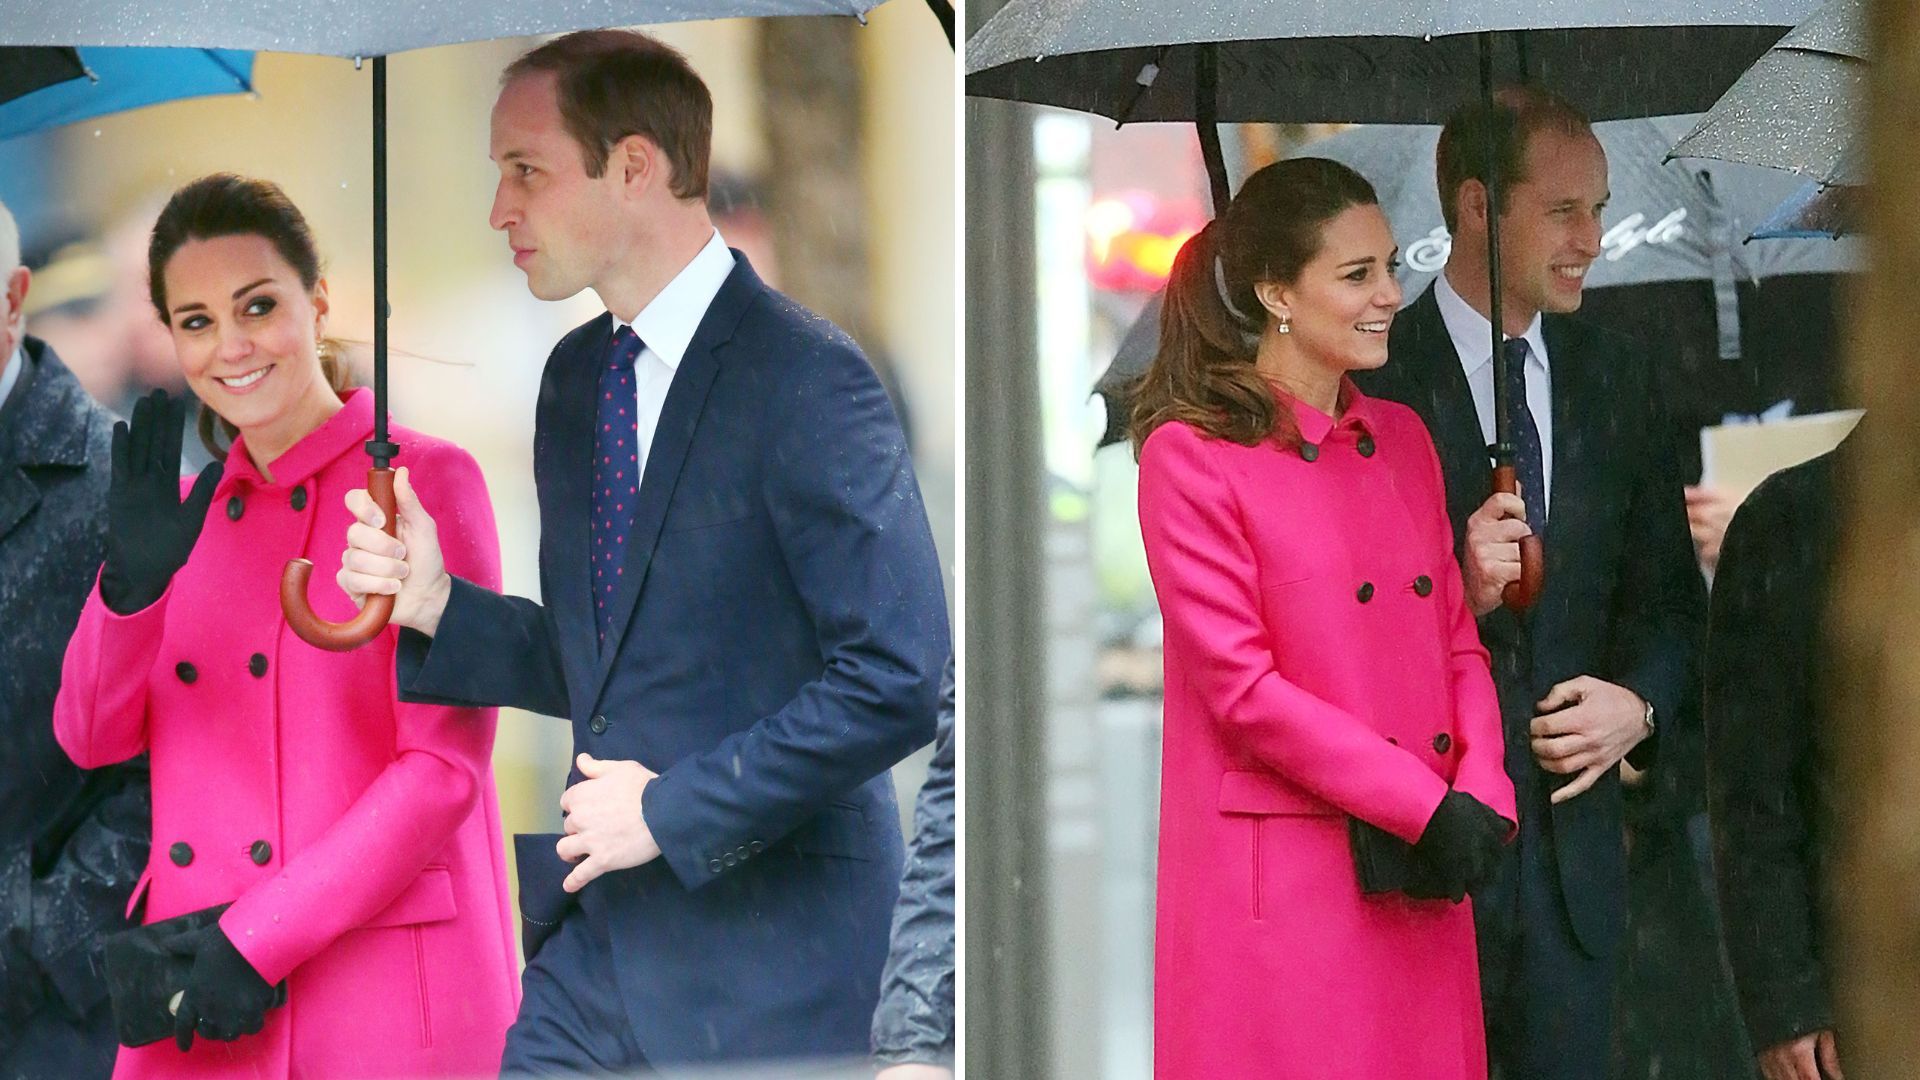 <p>                     Kate Middleton wasn't afraid of thinking big and bold when taking a bite out of the Big Apple in 2014.                   </p>                                      <p>                     Stepping out in a very eye-catching, hot pink Mulberry coat - which she had first debuted when pregnant with Princess Charlotte - the pregnant Kate's choice of colour had fans convinced she was having a second girl.                   </p>                                      <p>                     Of course, their third child turned out to be Prince Louis. So, no subtle messages here, just a very memorable fashion moment from the stylish Princess.                   </p>